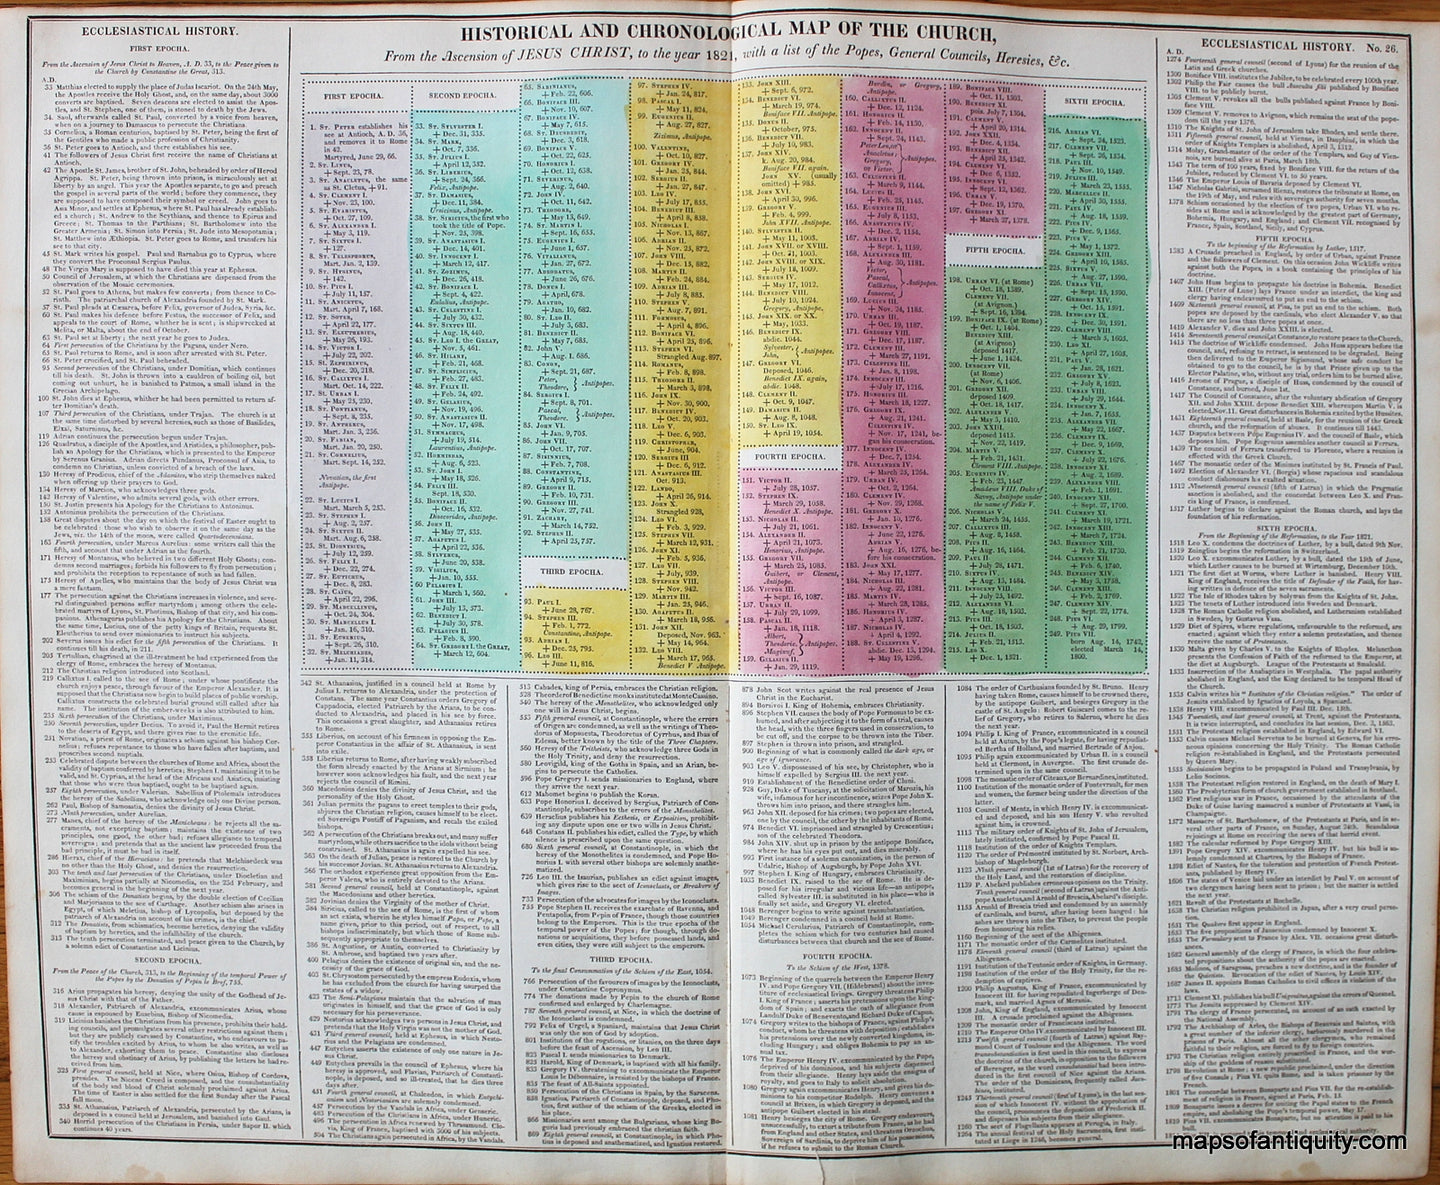 Hand-Colored-Antique-Timeline-Historical-and-Chronological-Map-of-the-Church-From-the-Ascension-of-Jesus-Christ-to-the-year-1821-with-a-list-of-the-Popes-General-Councils-Heresies-etc.-No.-26-Other--World-1821-Lavoisne-Maps-Of-Antiquity